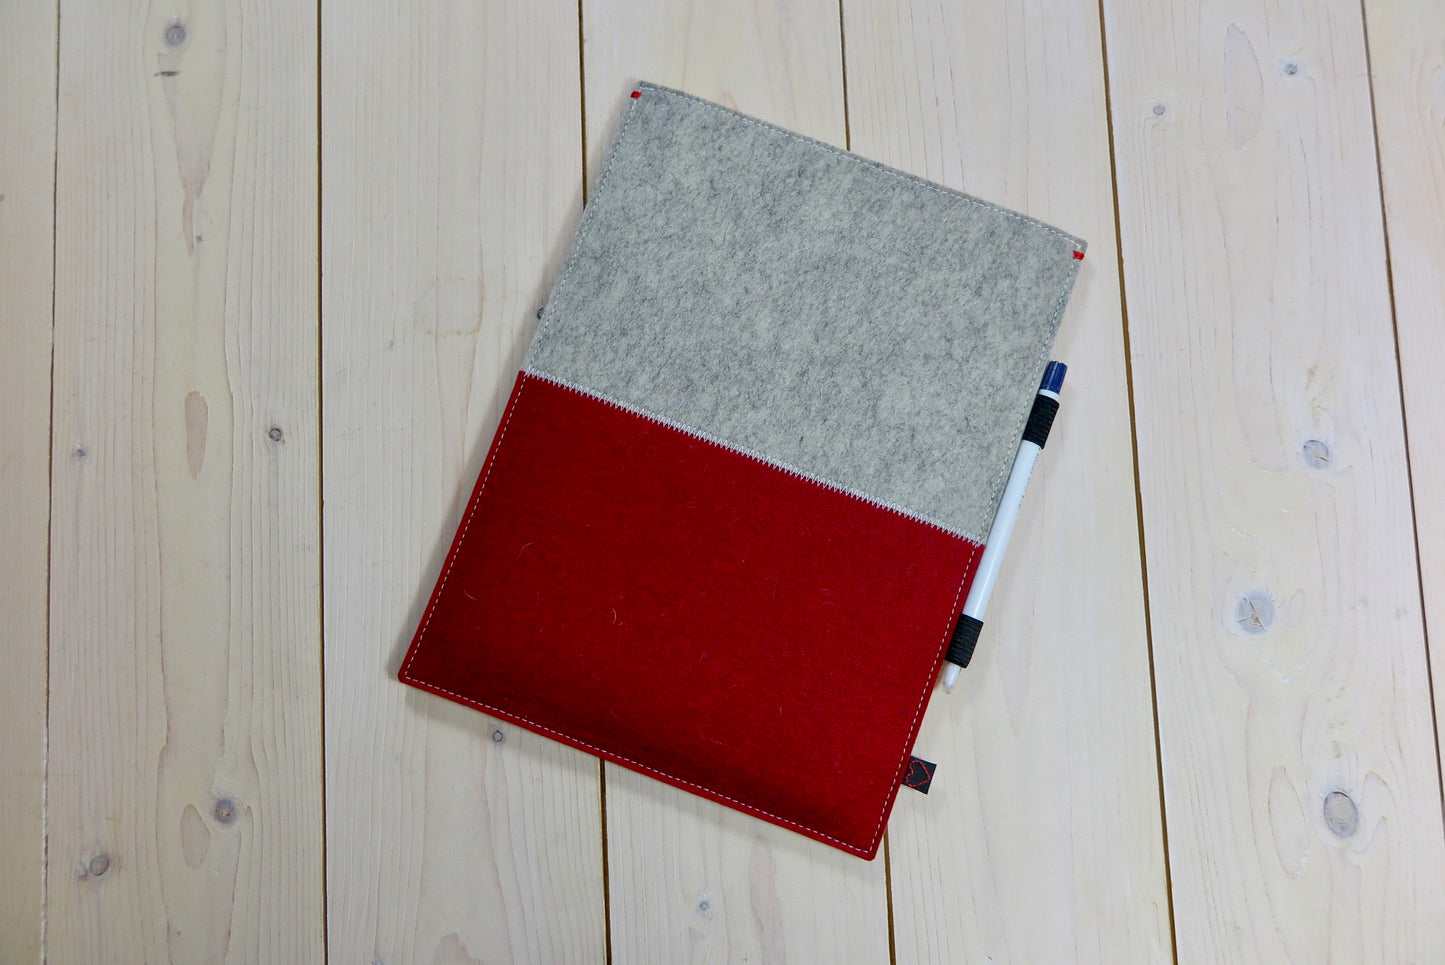 Ipad Pro 105 felt case in red and grey